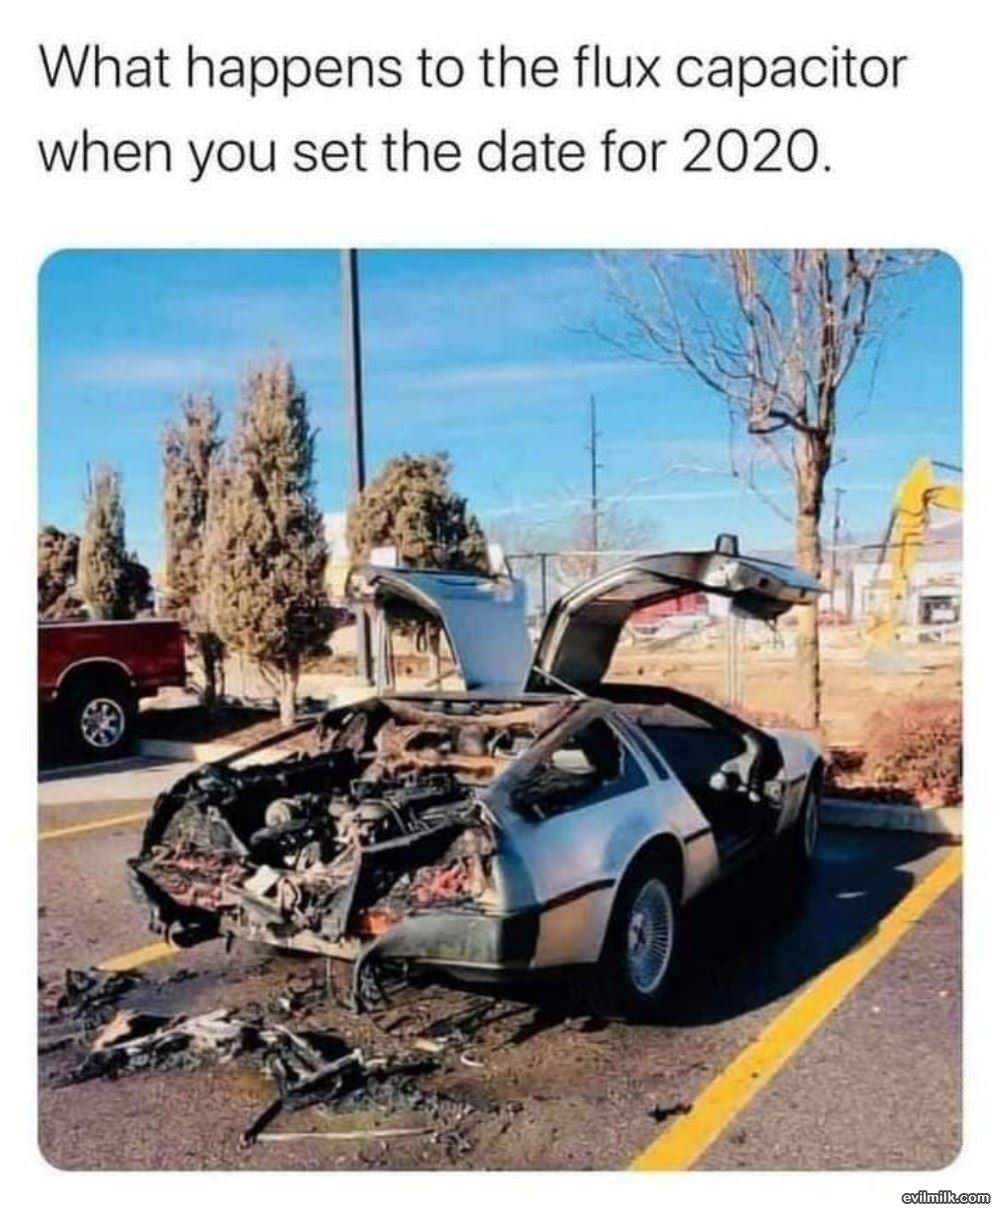 Set It For 2020